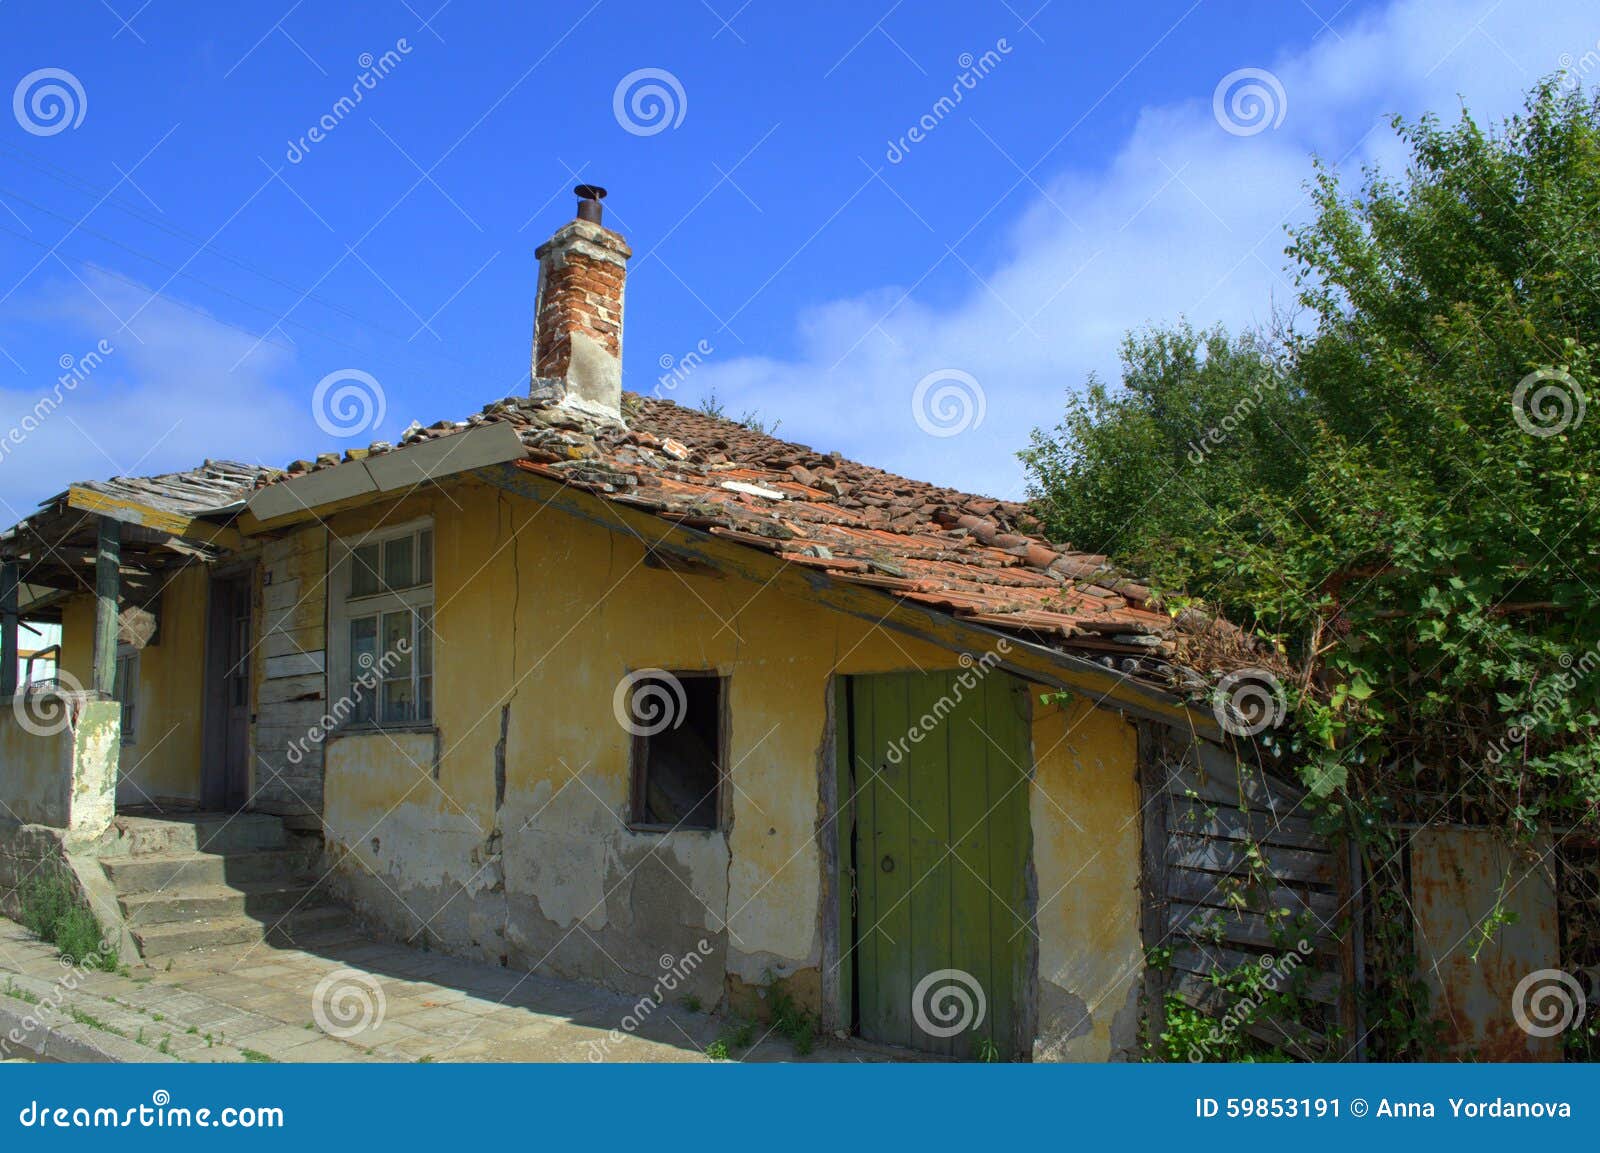 Old crumbling house stock image. Image of resort, province - 59853191